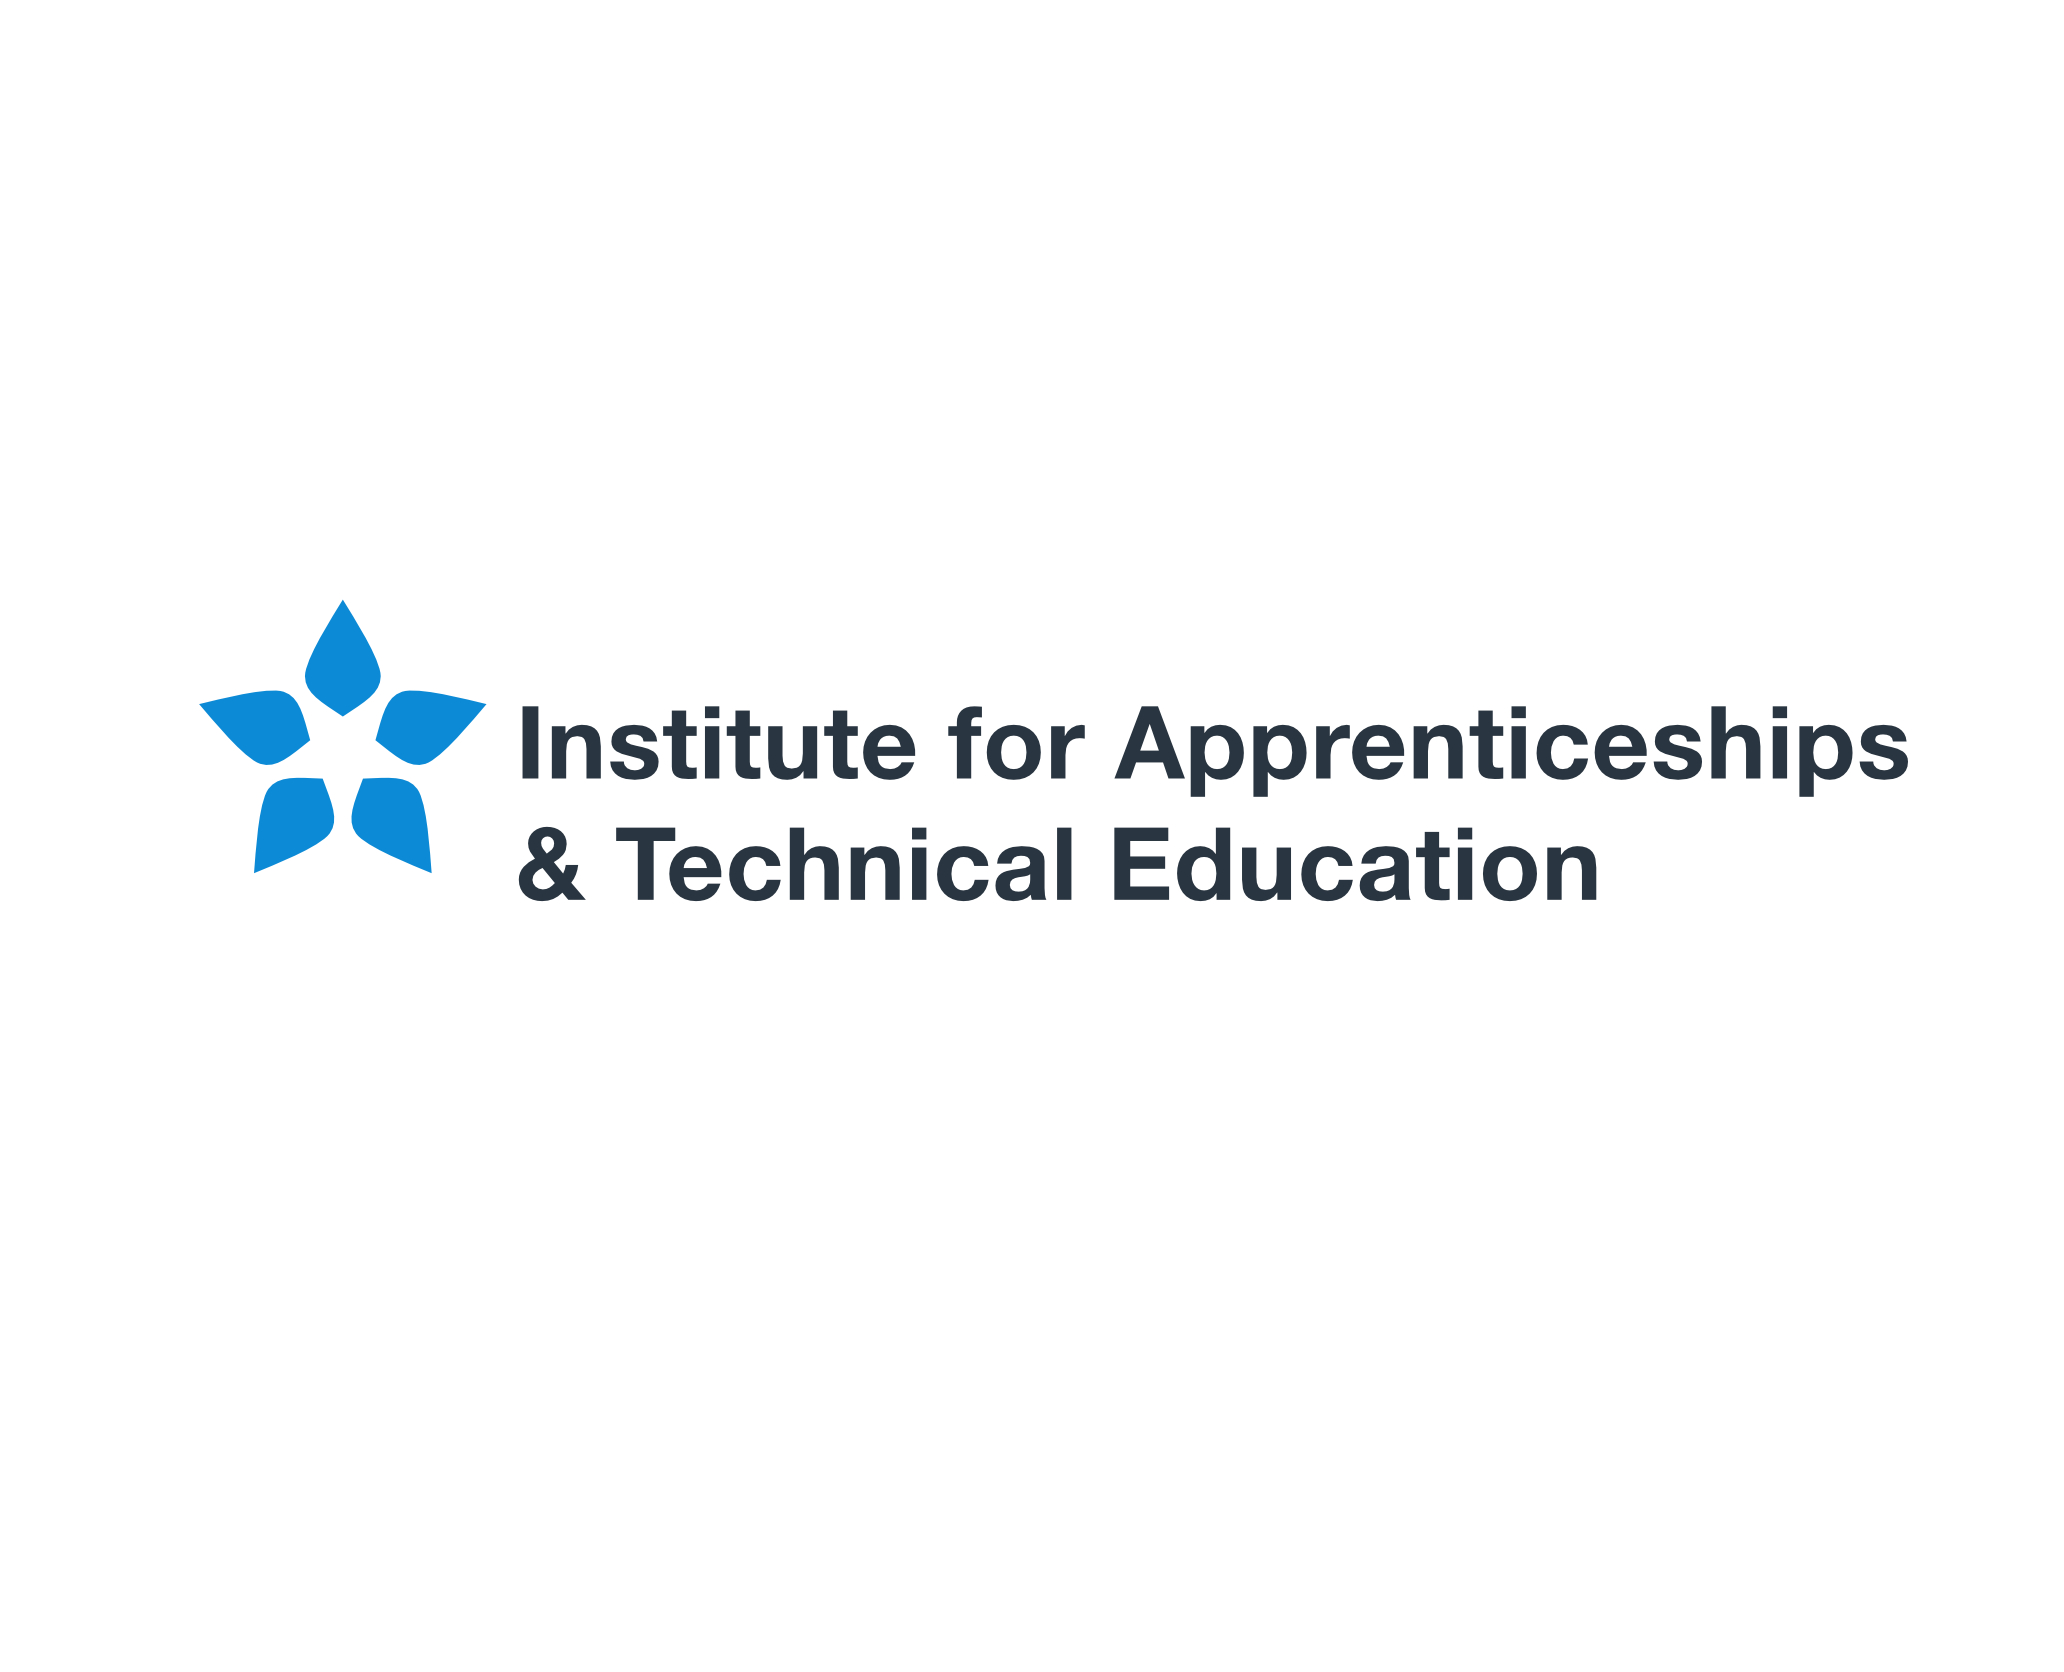 What is the role of the Institute for Apprenticeships and Technical Education?